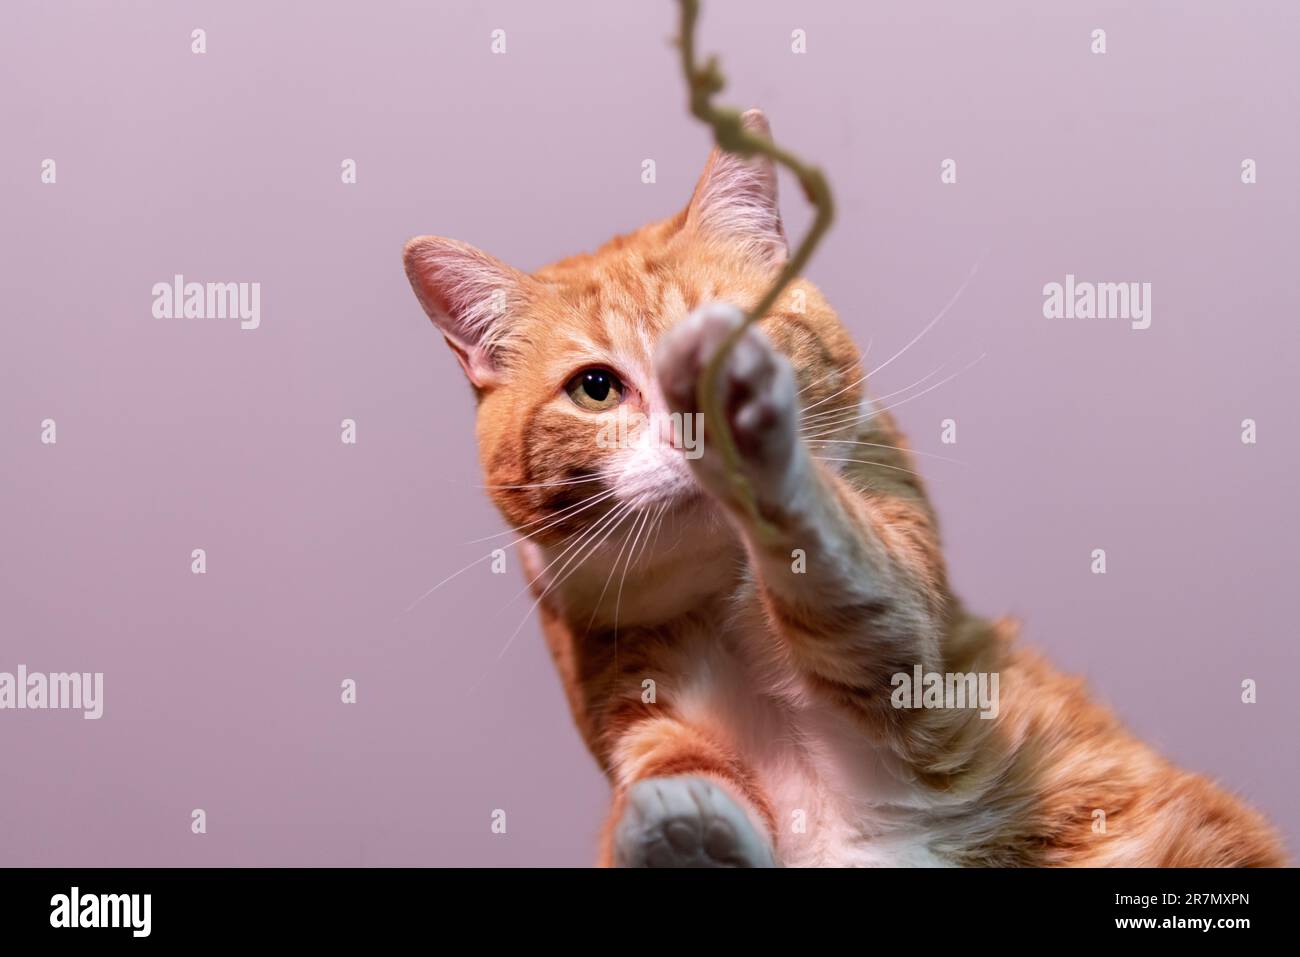 A cute, adorable ginger tabby cat licking glass from underneath above photographer, camera. Pink background, toe beans, pink toes, face and whiskers. Stock Photo